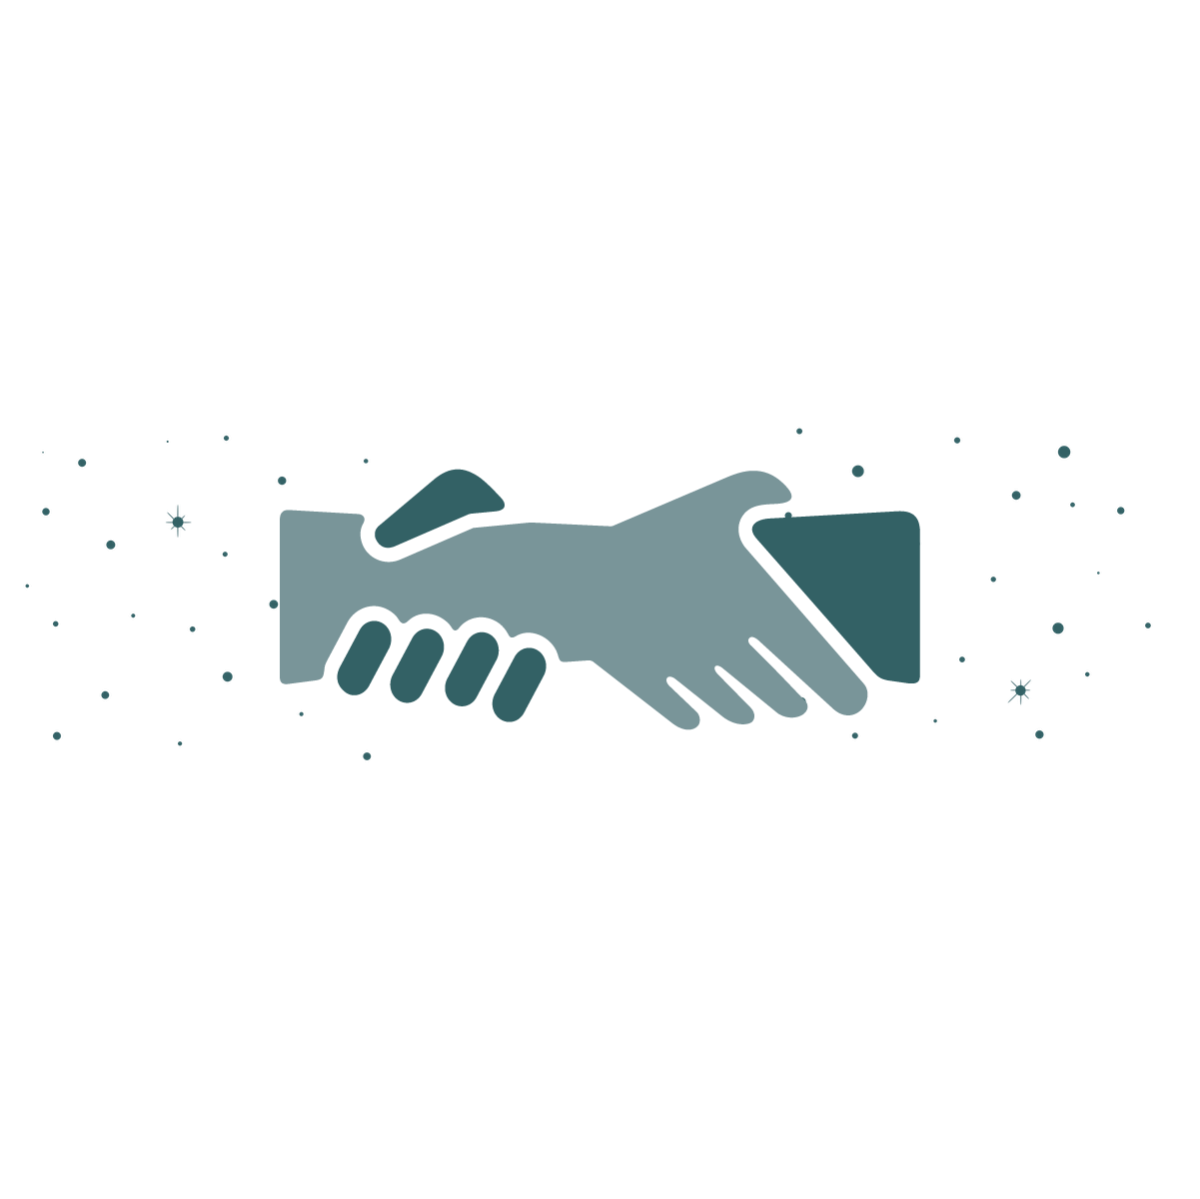 Line art image of two hands clasped in front of a background of stars